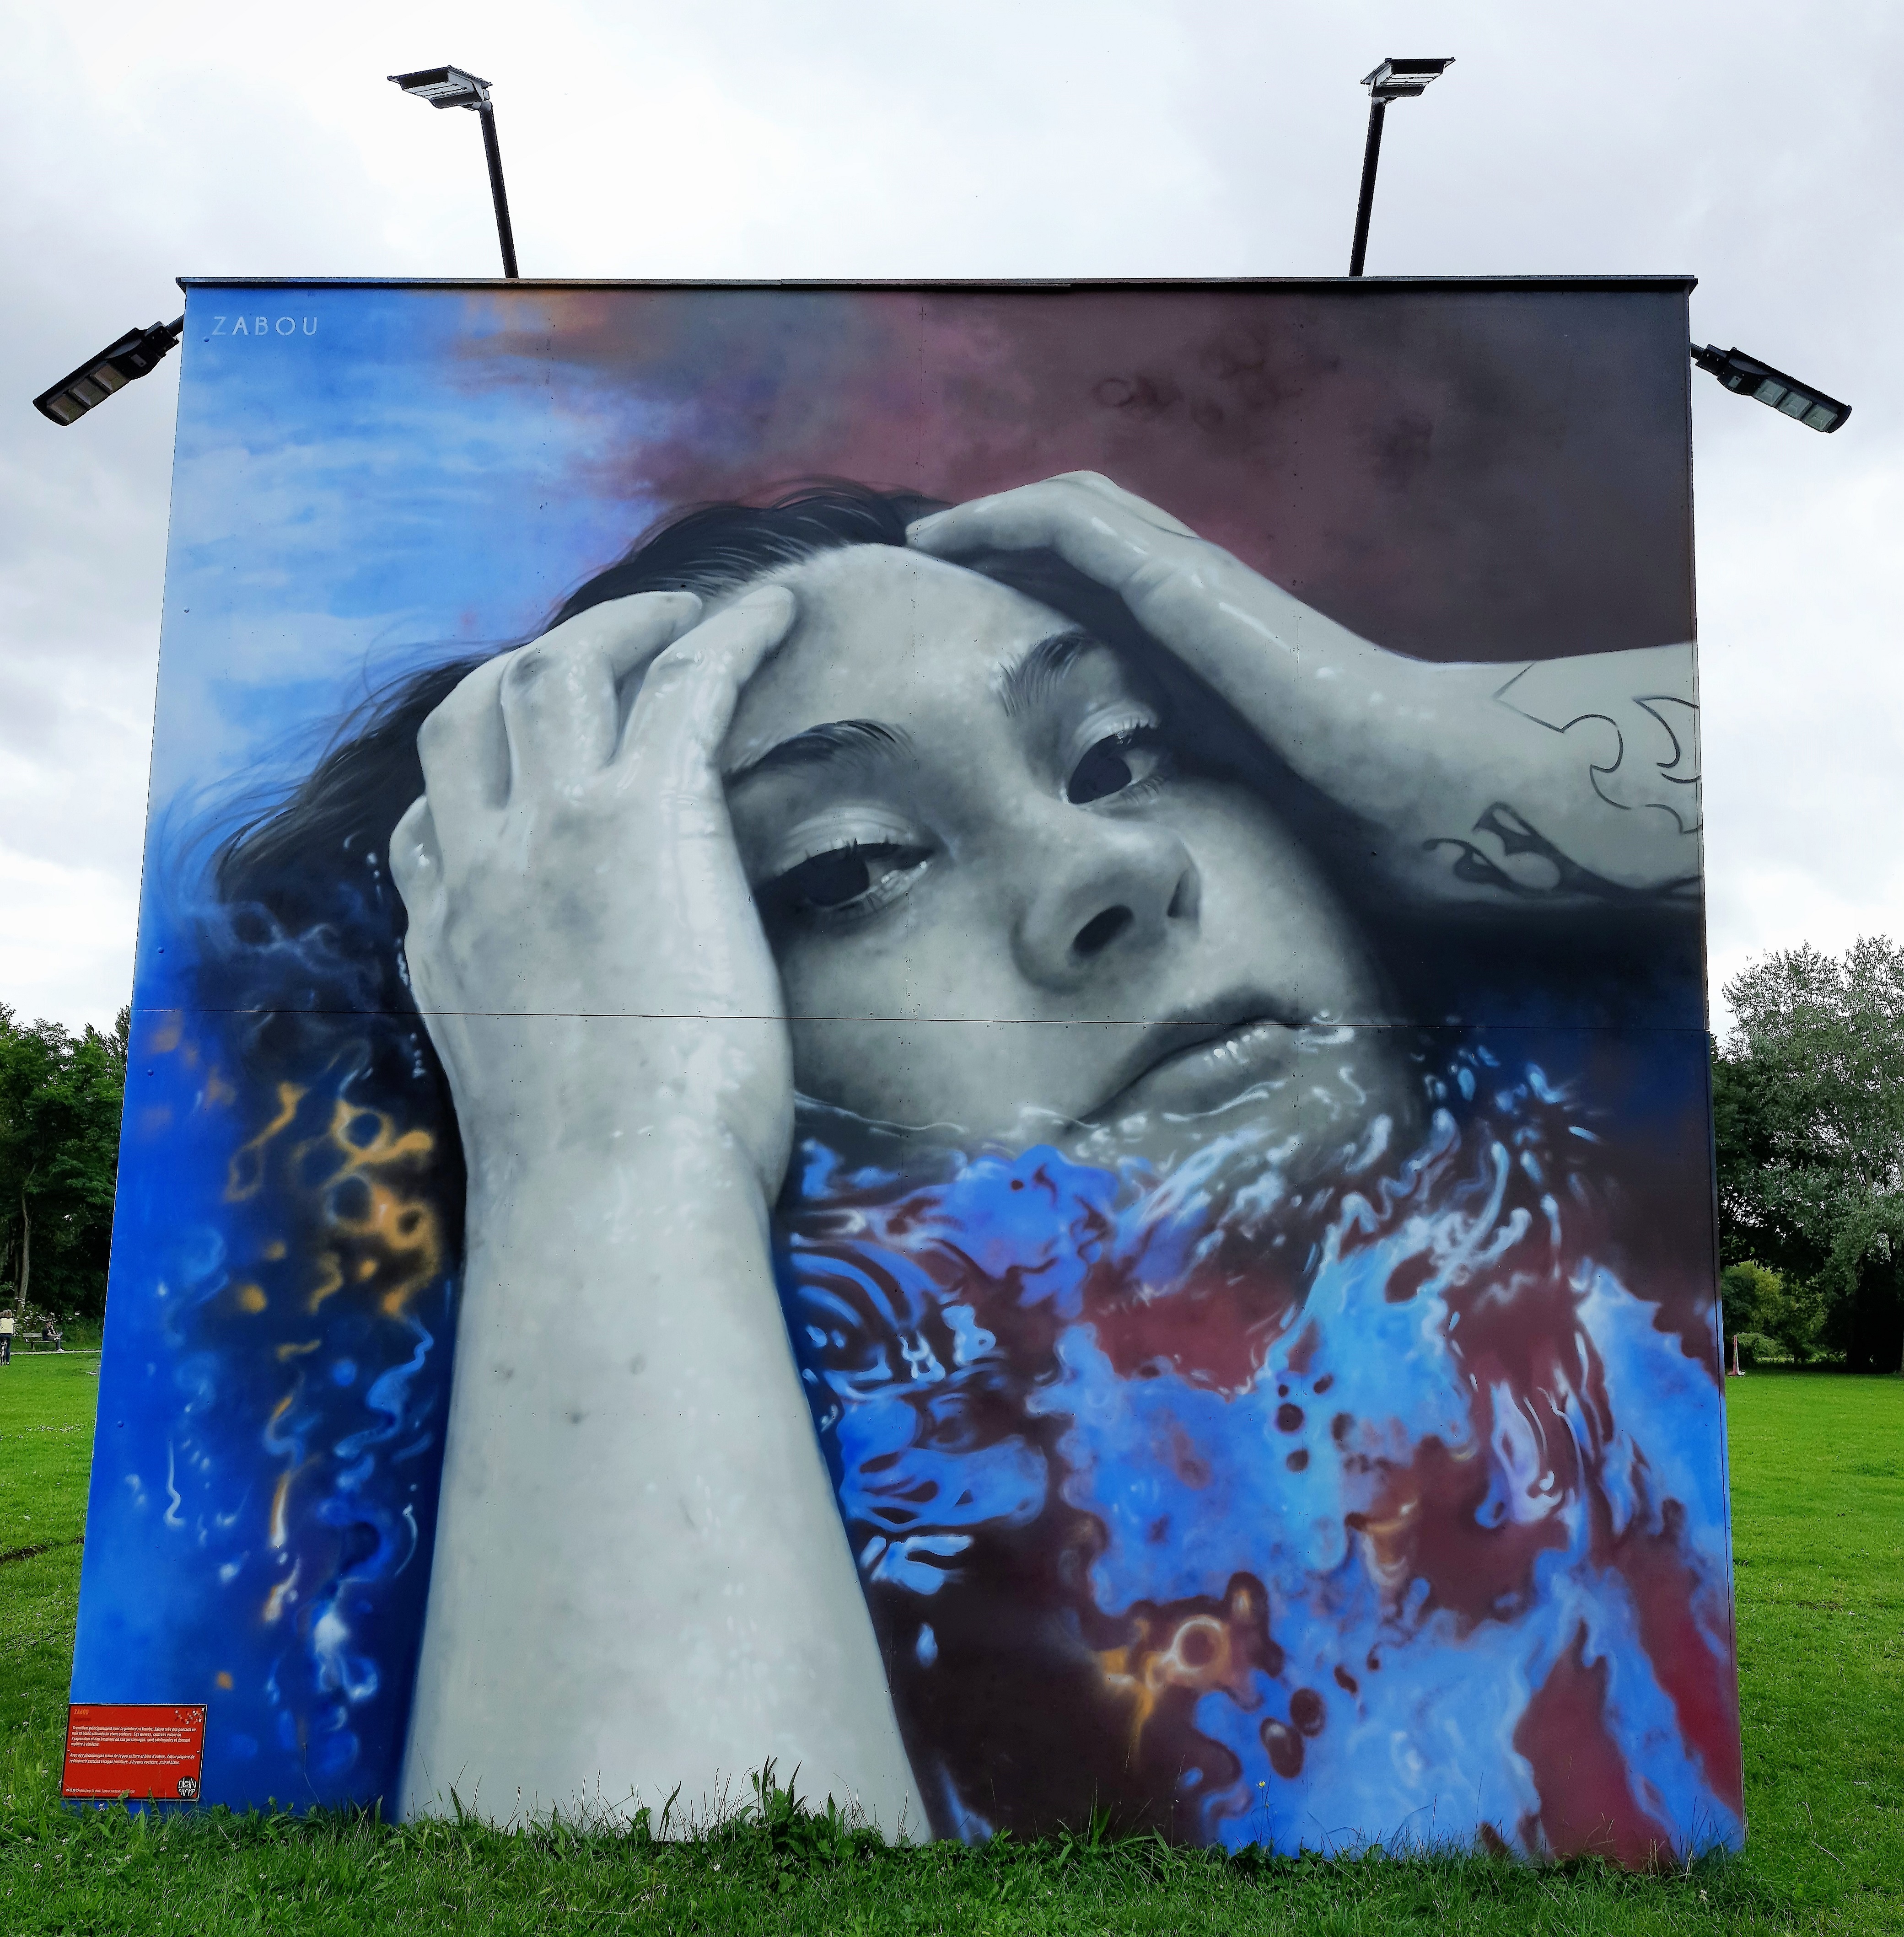 Graffiti 6952  by the artist ZABOU captured by Mephisroth in Le Mans France